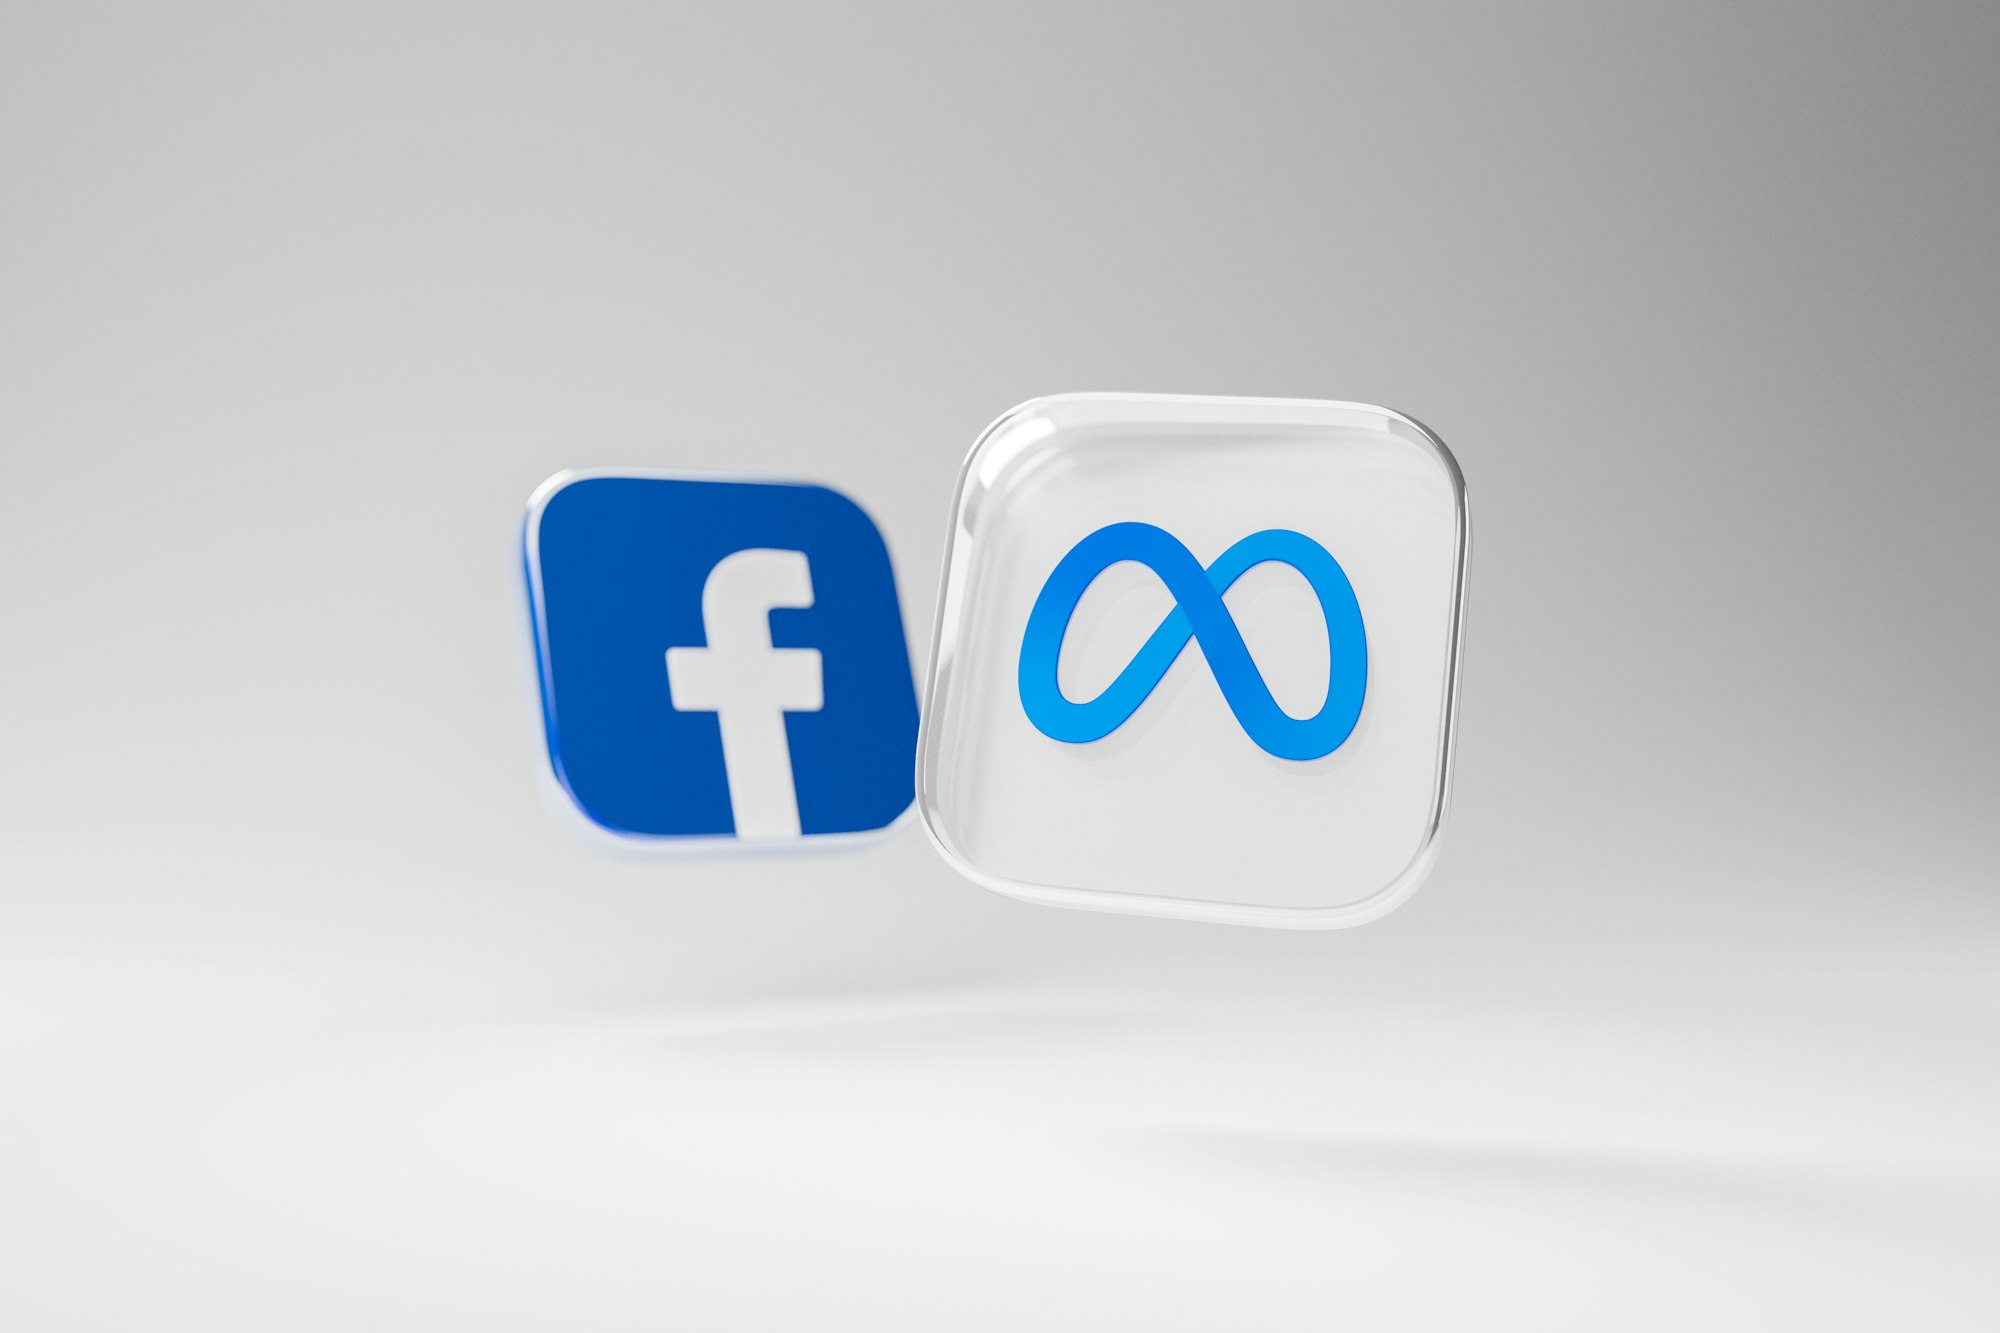 Facebook's transition to Meta — in 3D. 

More 3D app icons like these are coming soon. You can find my 3D work in the collection called "3D Design".
